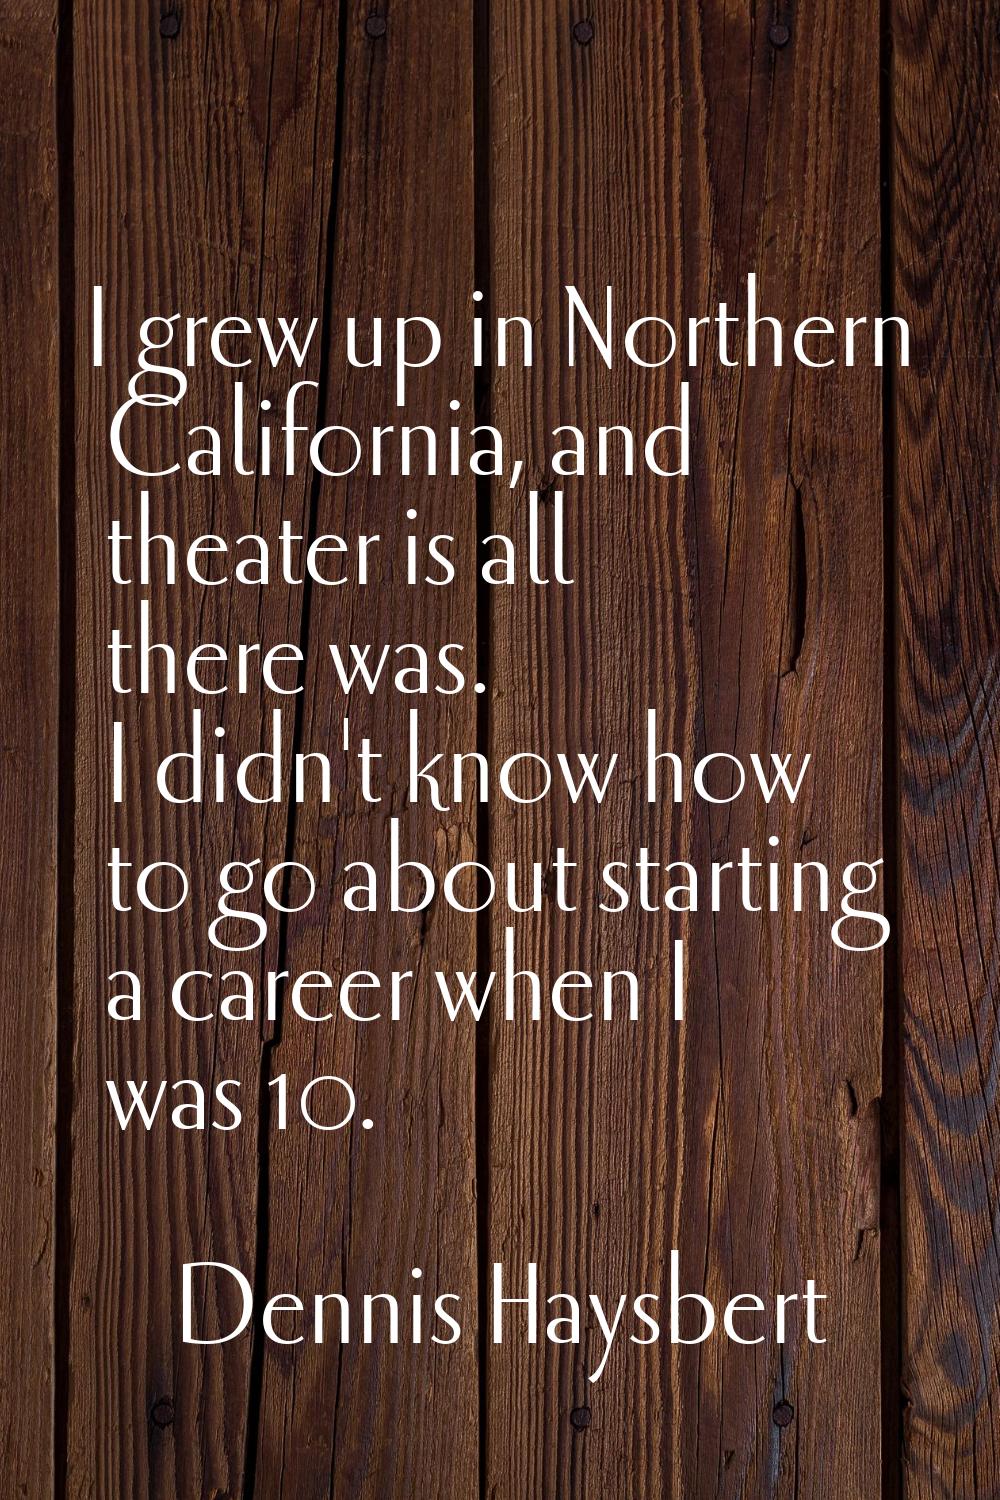 I grew up in Northern California, and theater is all there was. I didn't know how to go about start